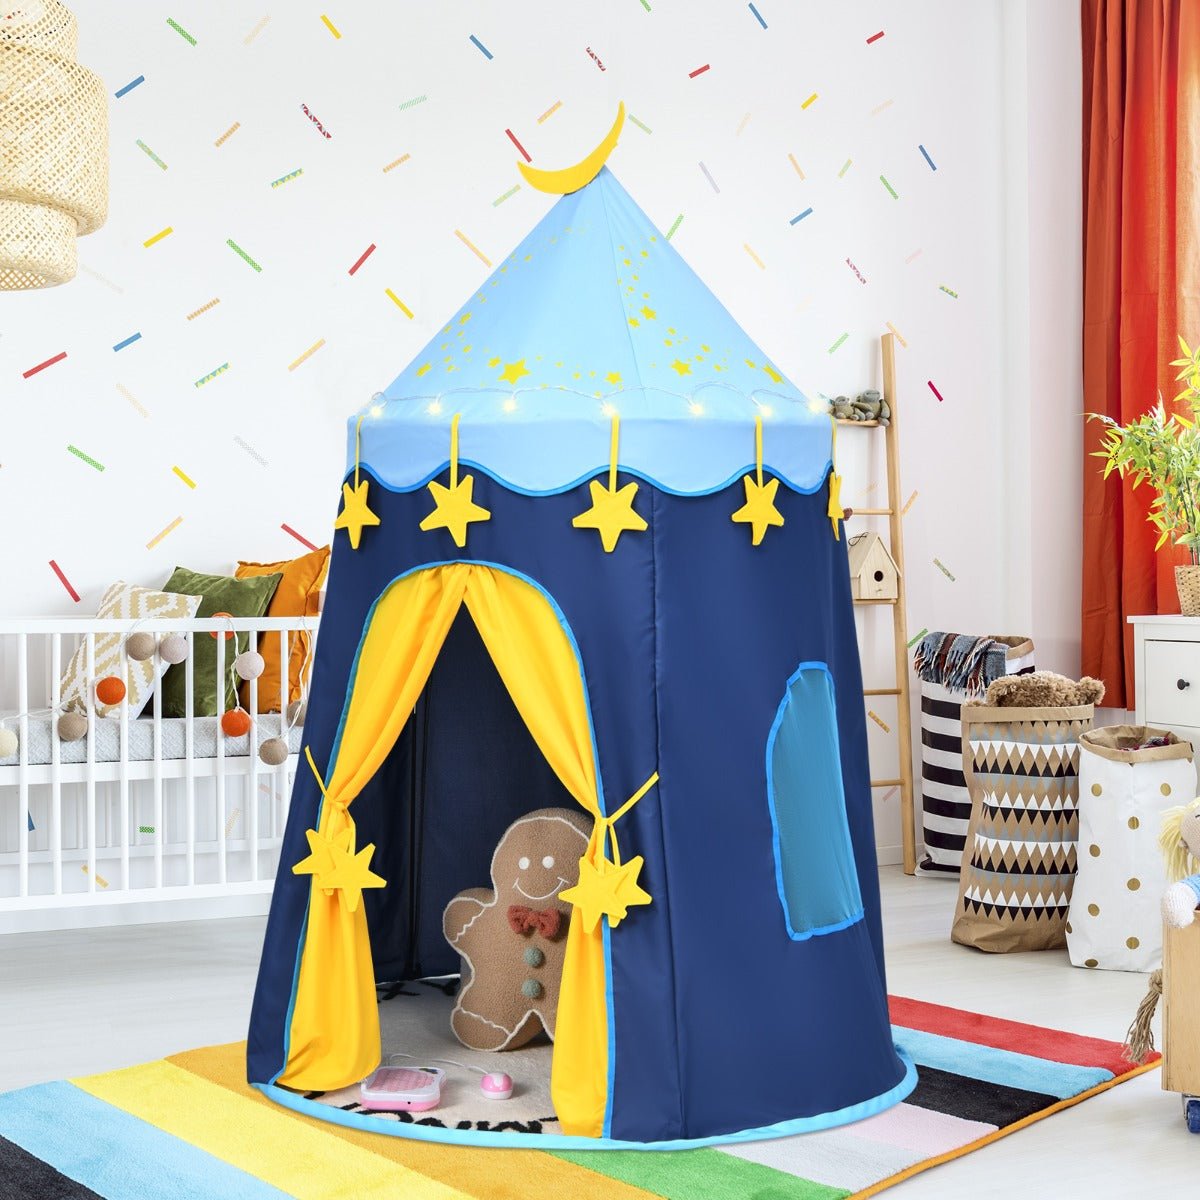 Explore and Play: Kids Pop Up Play Tent with Carry Bag & Star Lights